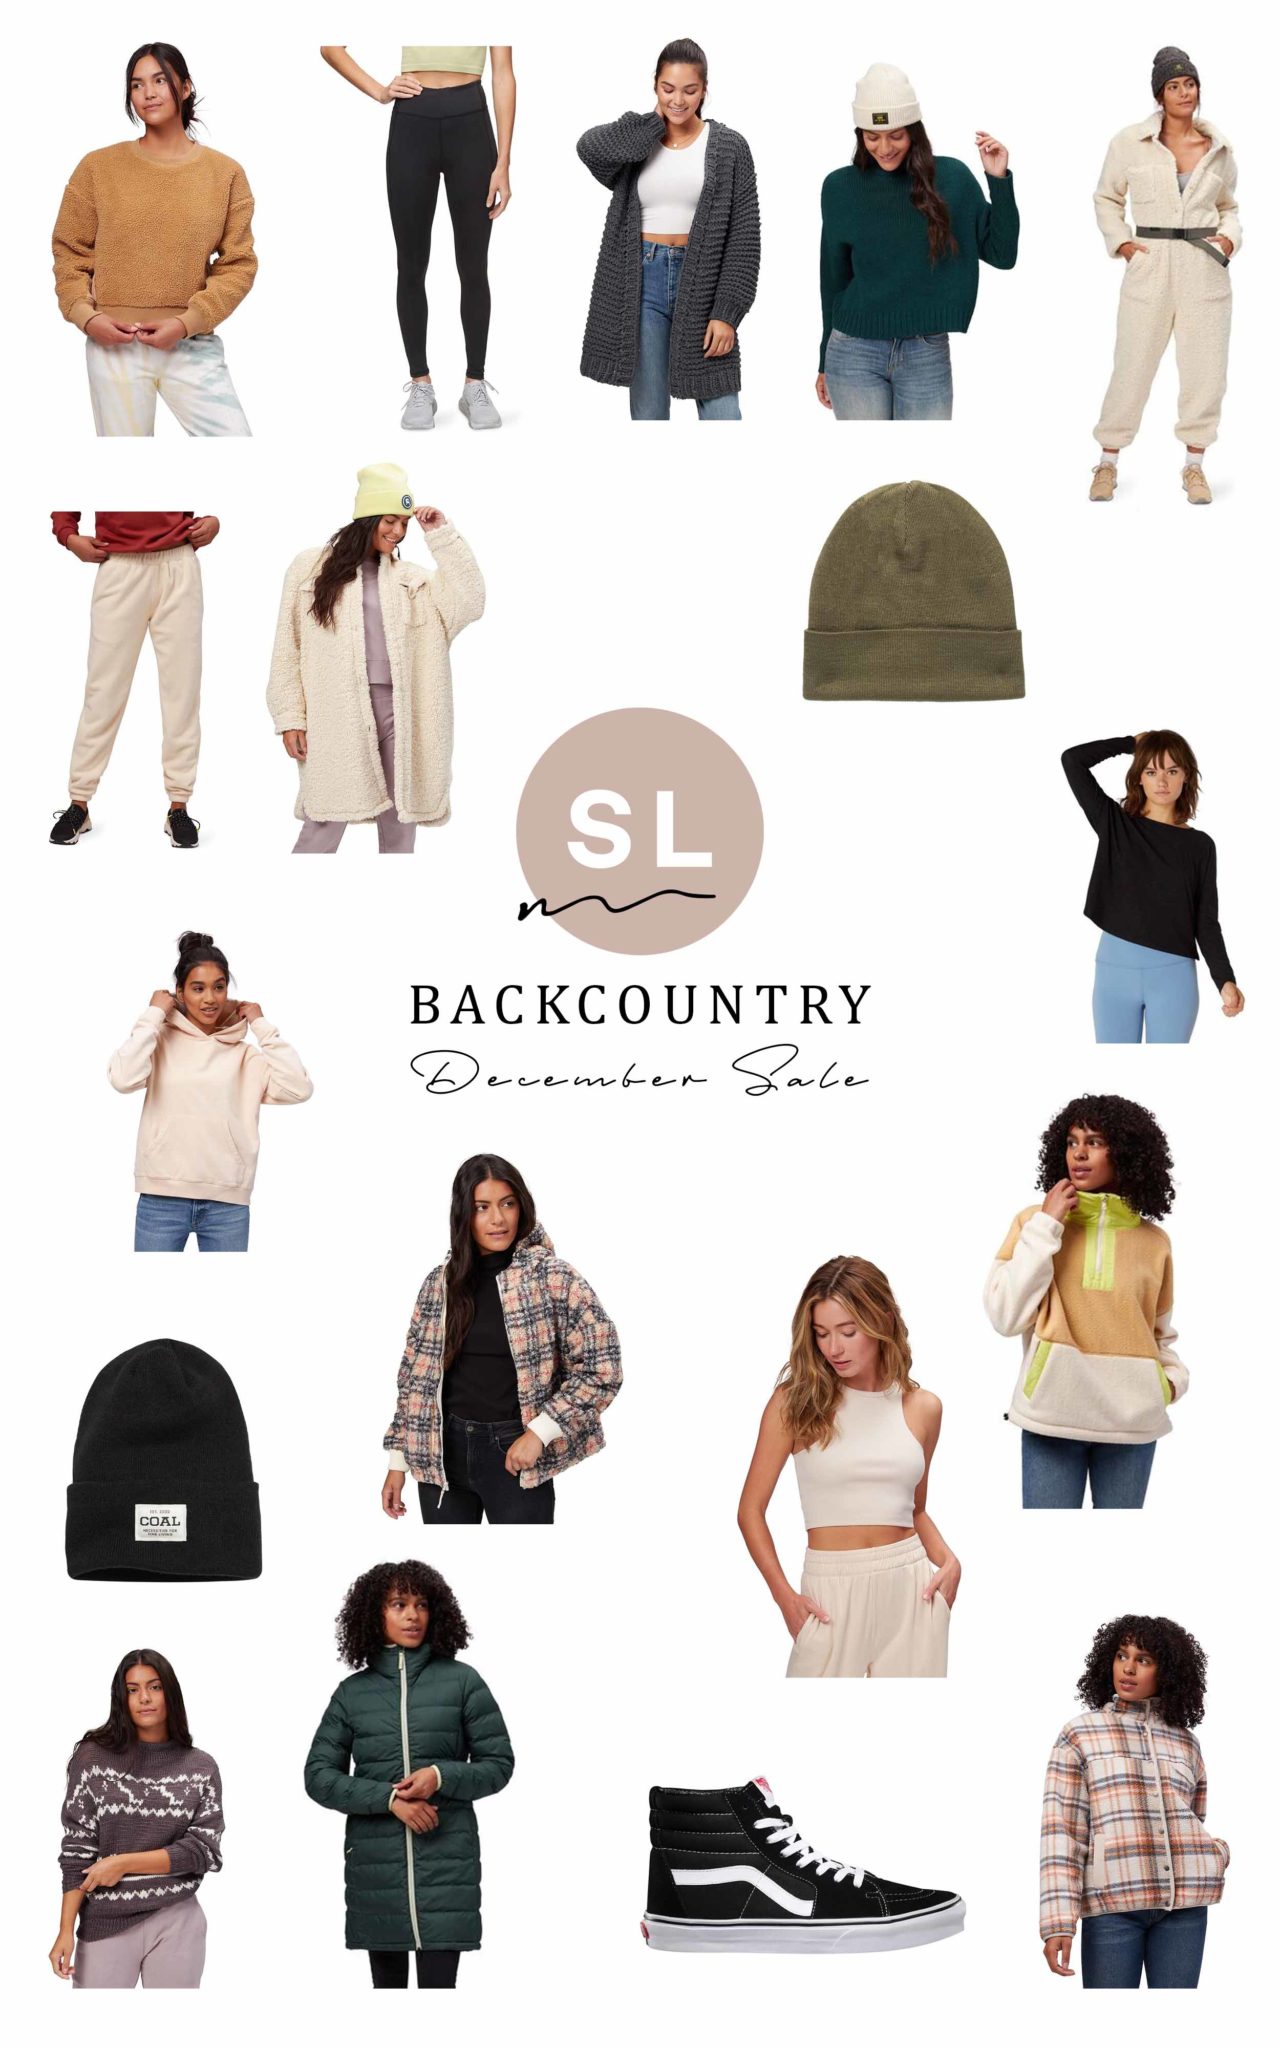 The Backcountry Sale